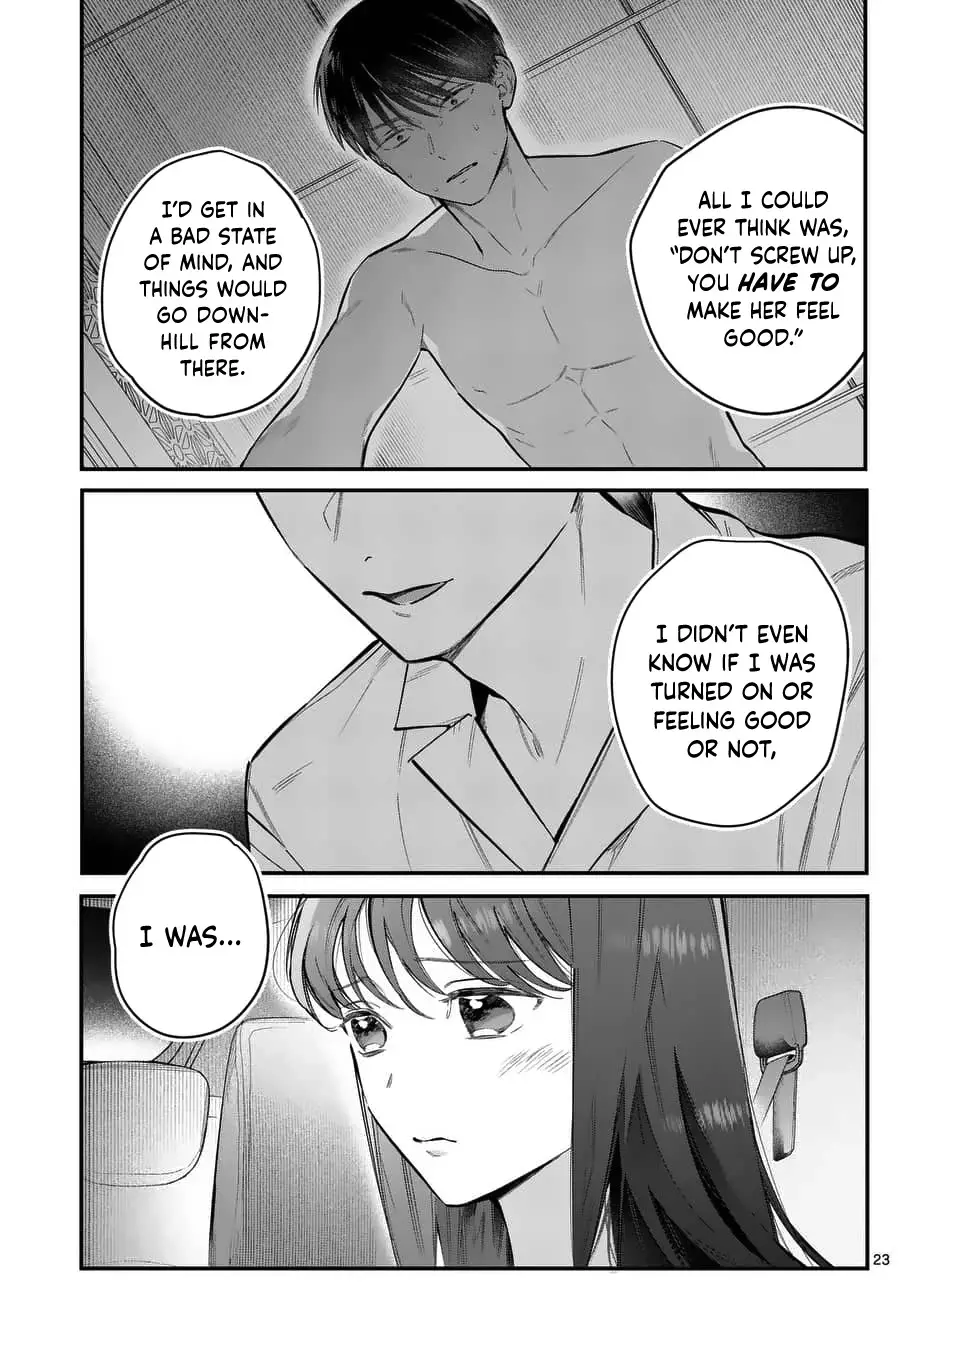 Is It Wrong To Get Done By A Girl? - 6 page 23